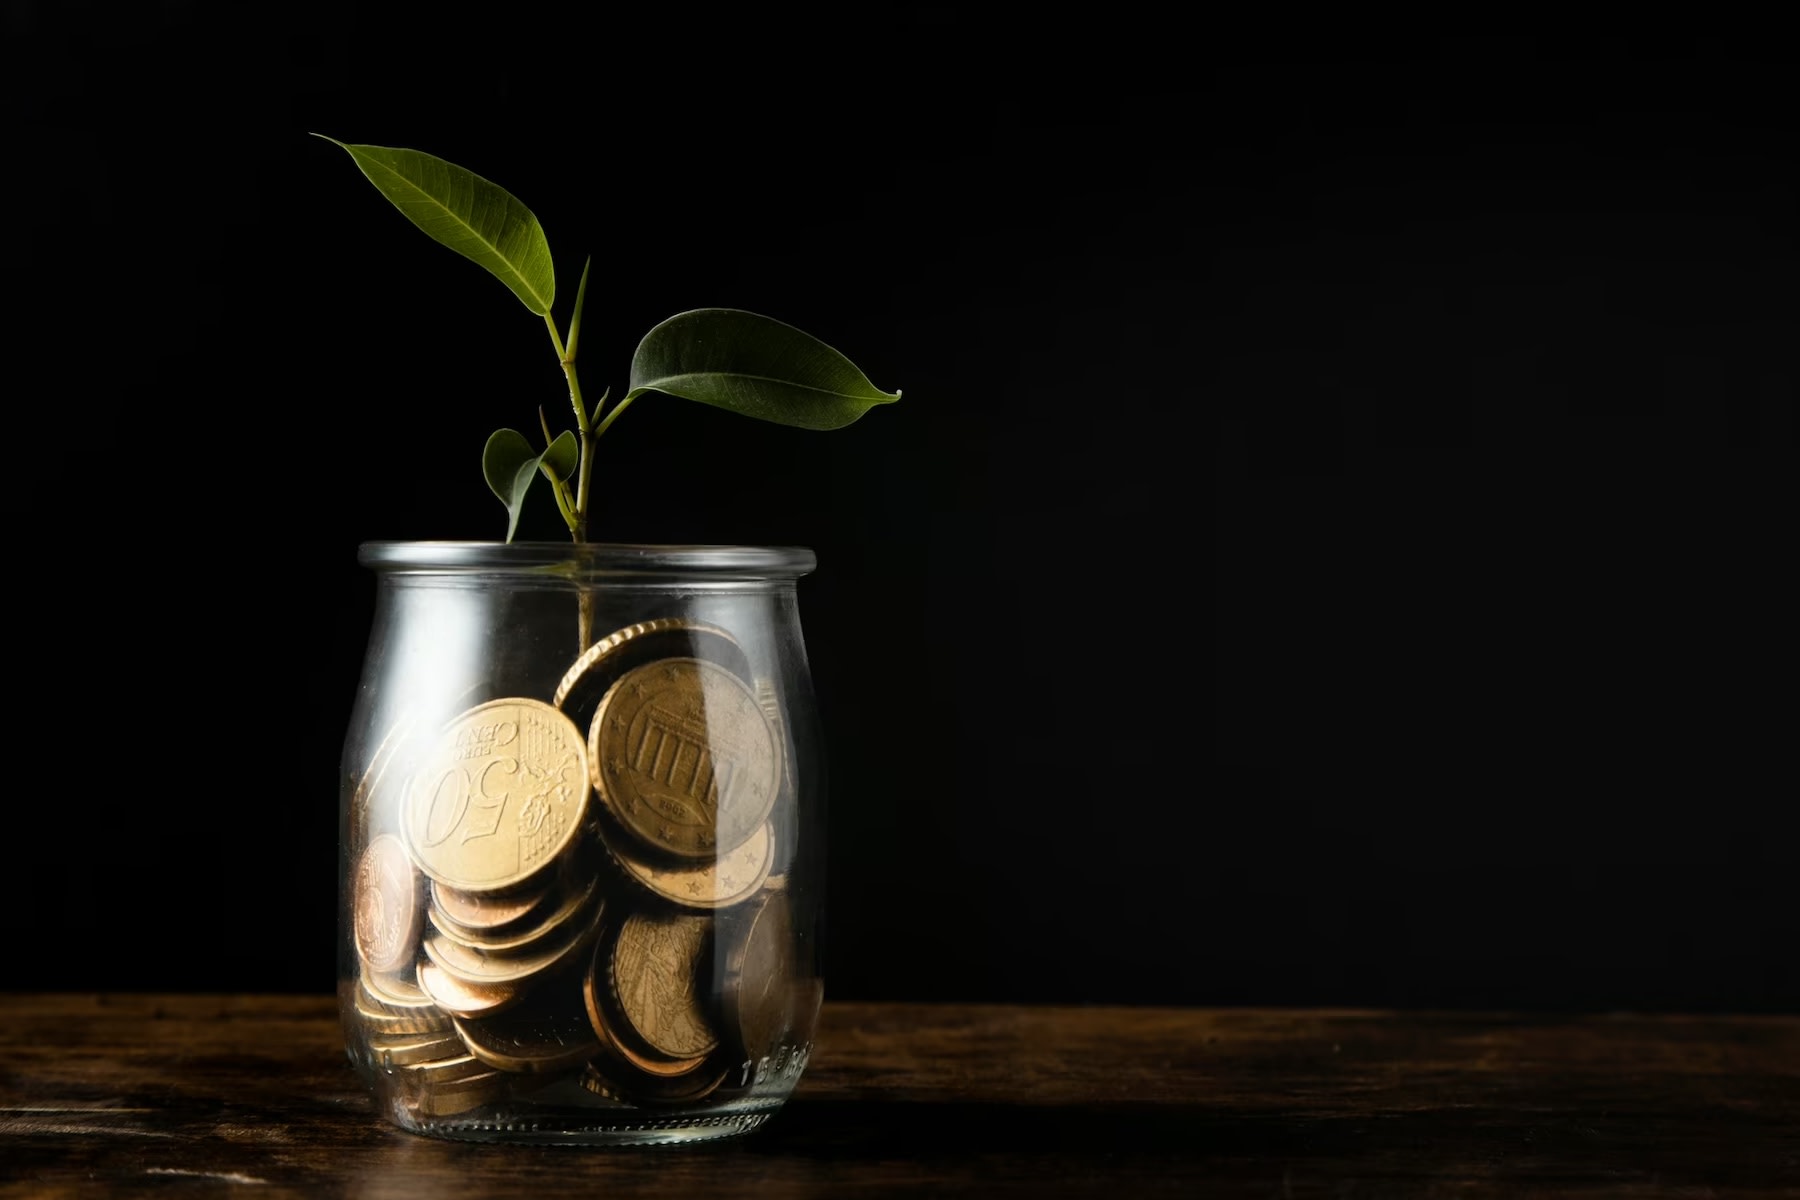 Image of jar full of coins with plant growing out of it